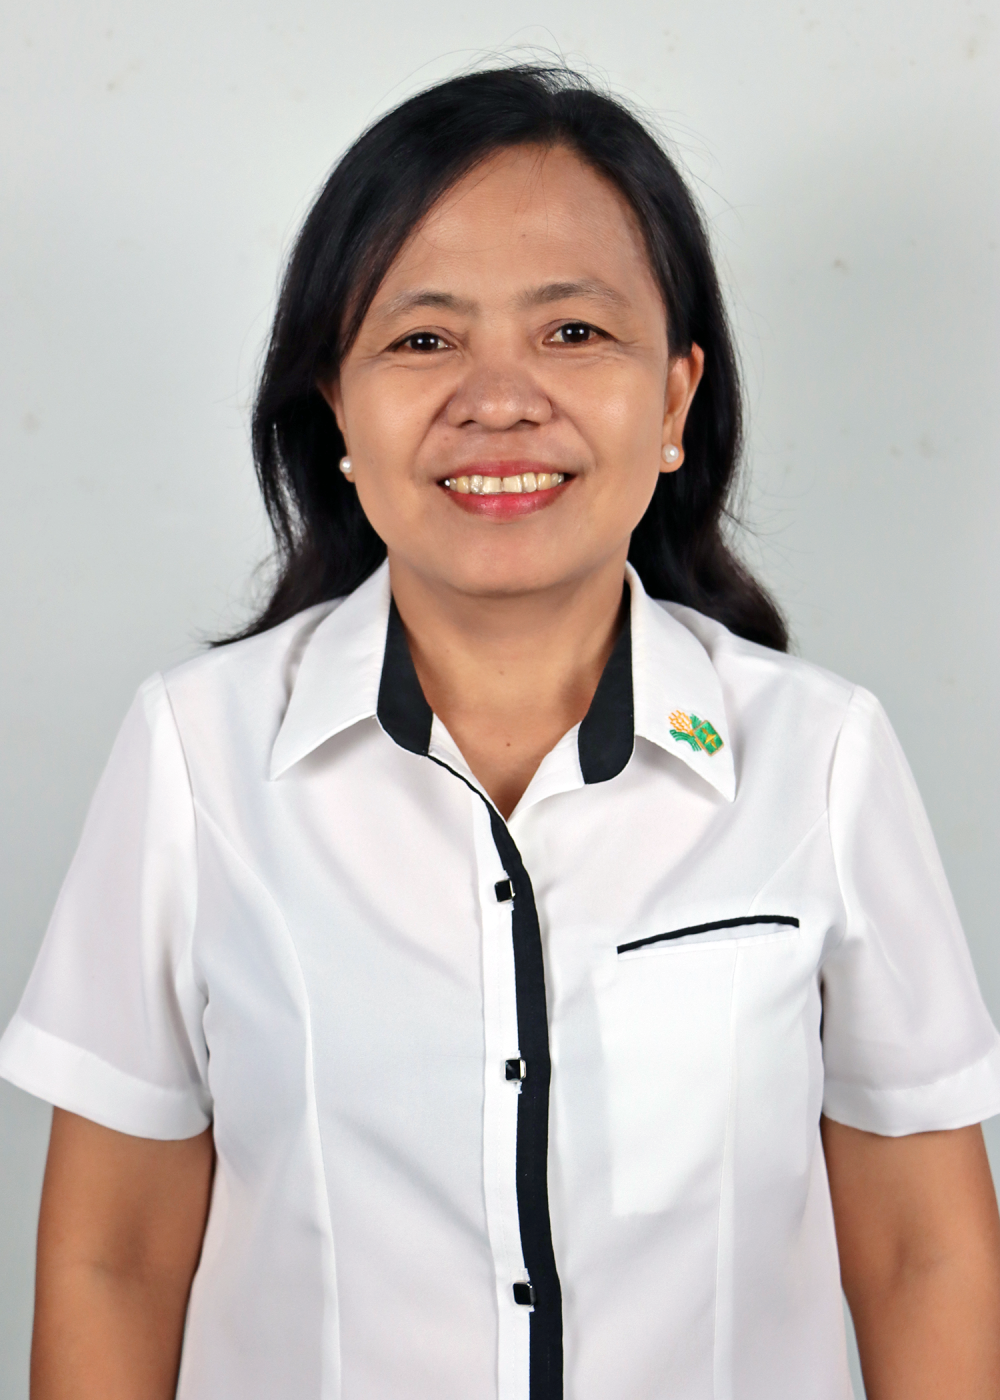 Directory of Officials | ATI Cagayan Valley